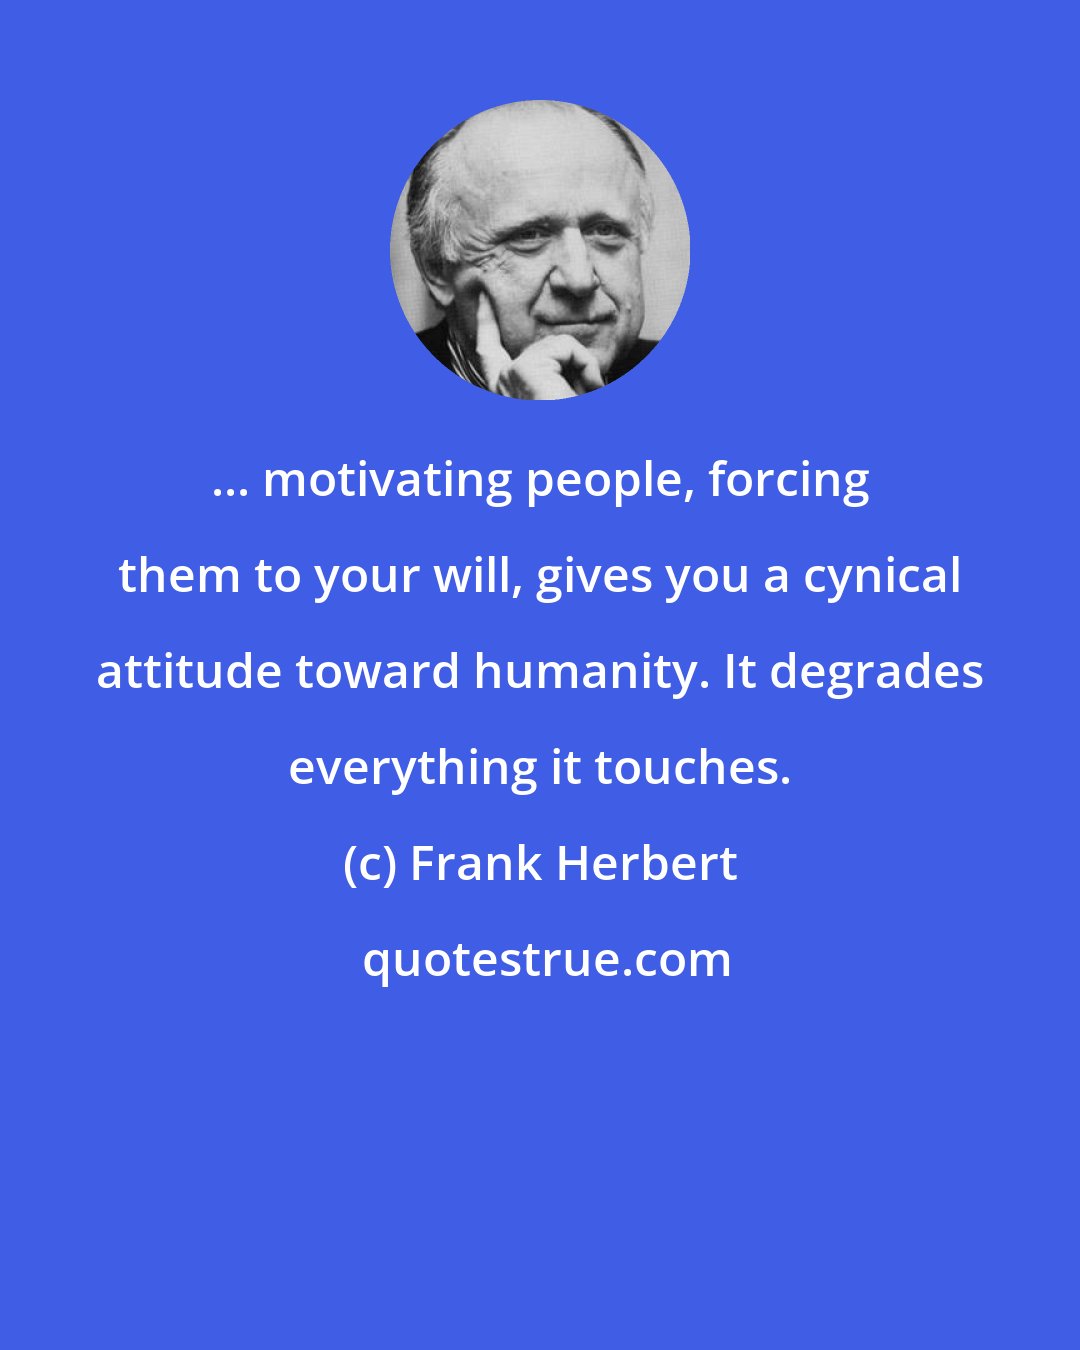 Frank Herbert: ... motivating people, forcing them to your will, gives you a cynical attitude toward humanity. It degrades everything it touches.